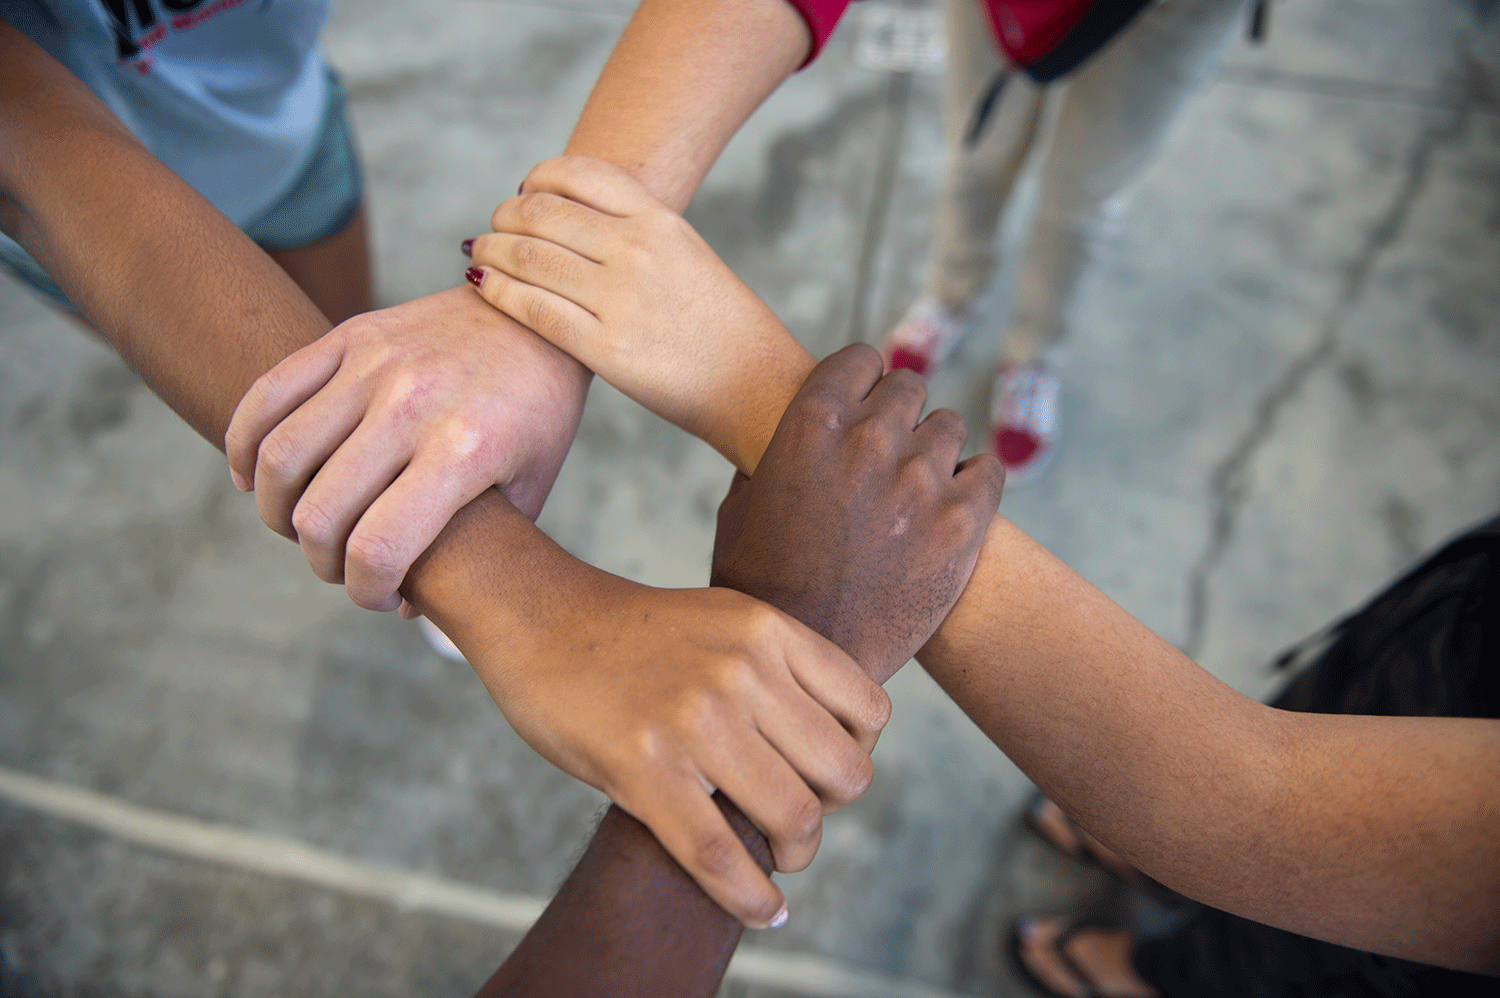 Four hands join together in a show of unity and inclusion